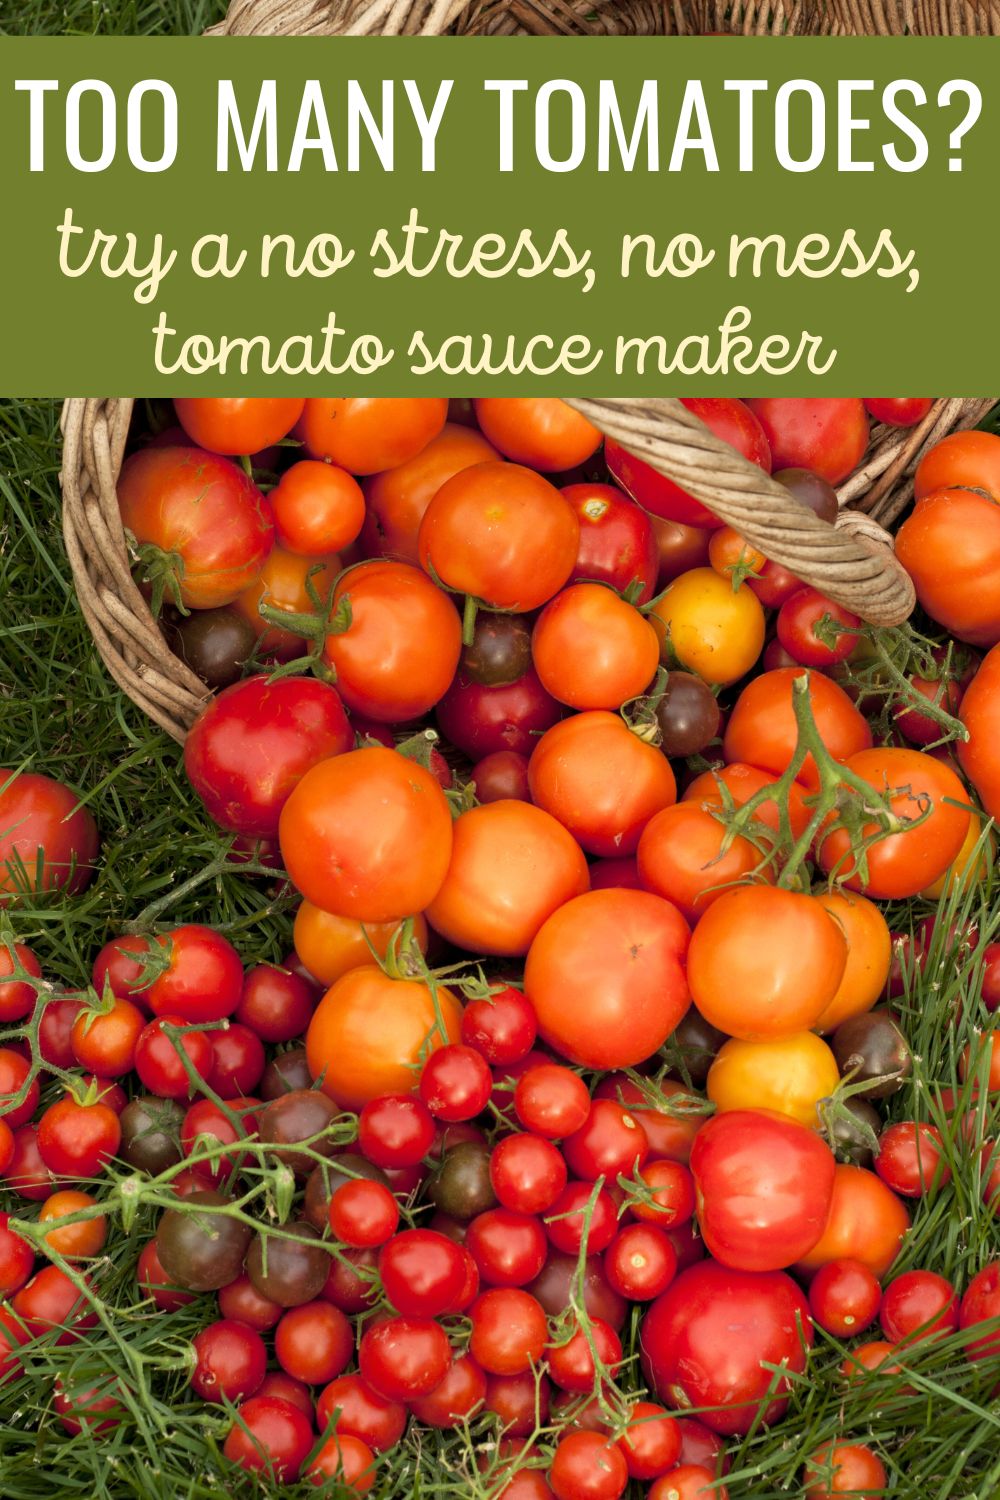 Too many tomatoes? Try a no-stress, no-mess, tomato sauce maker